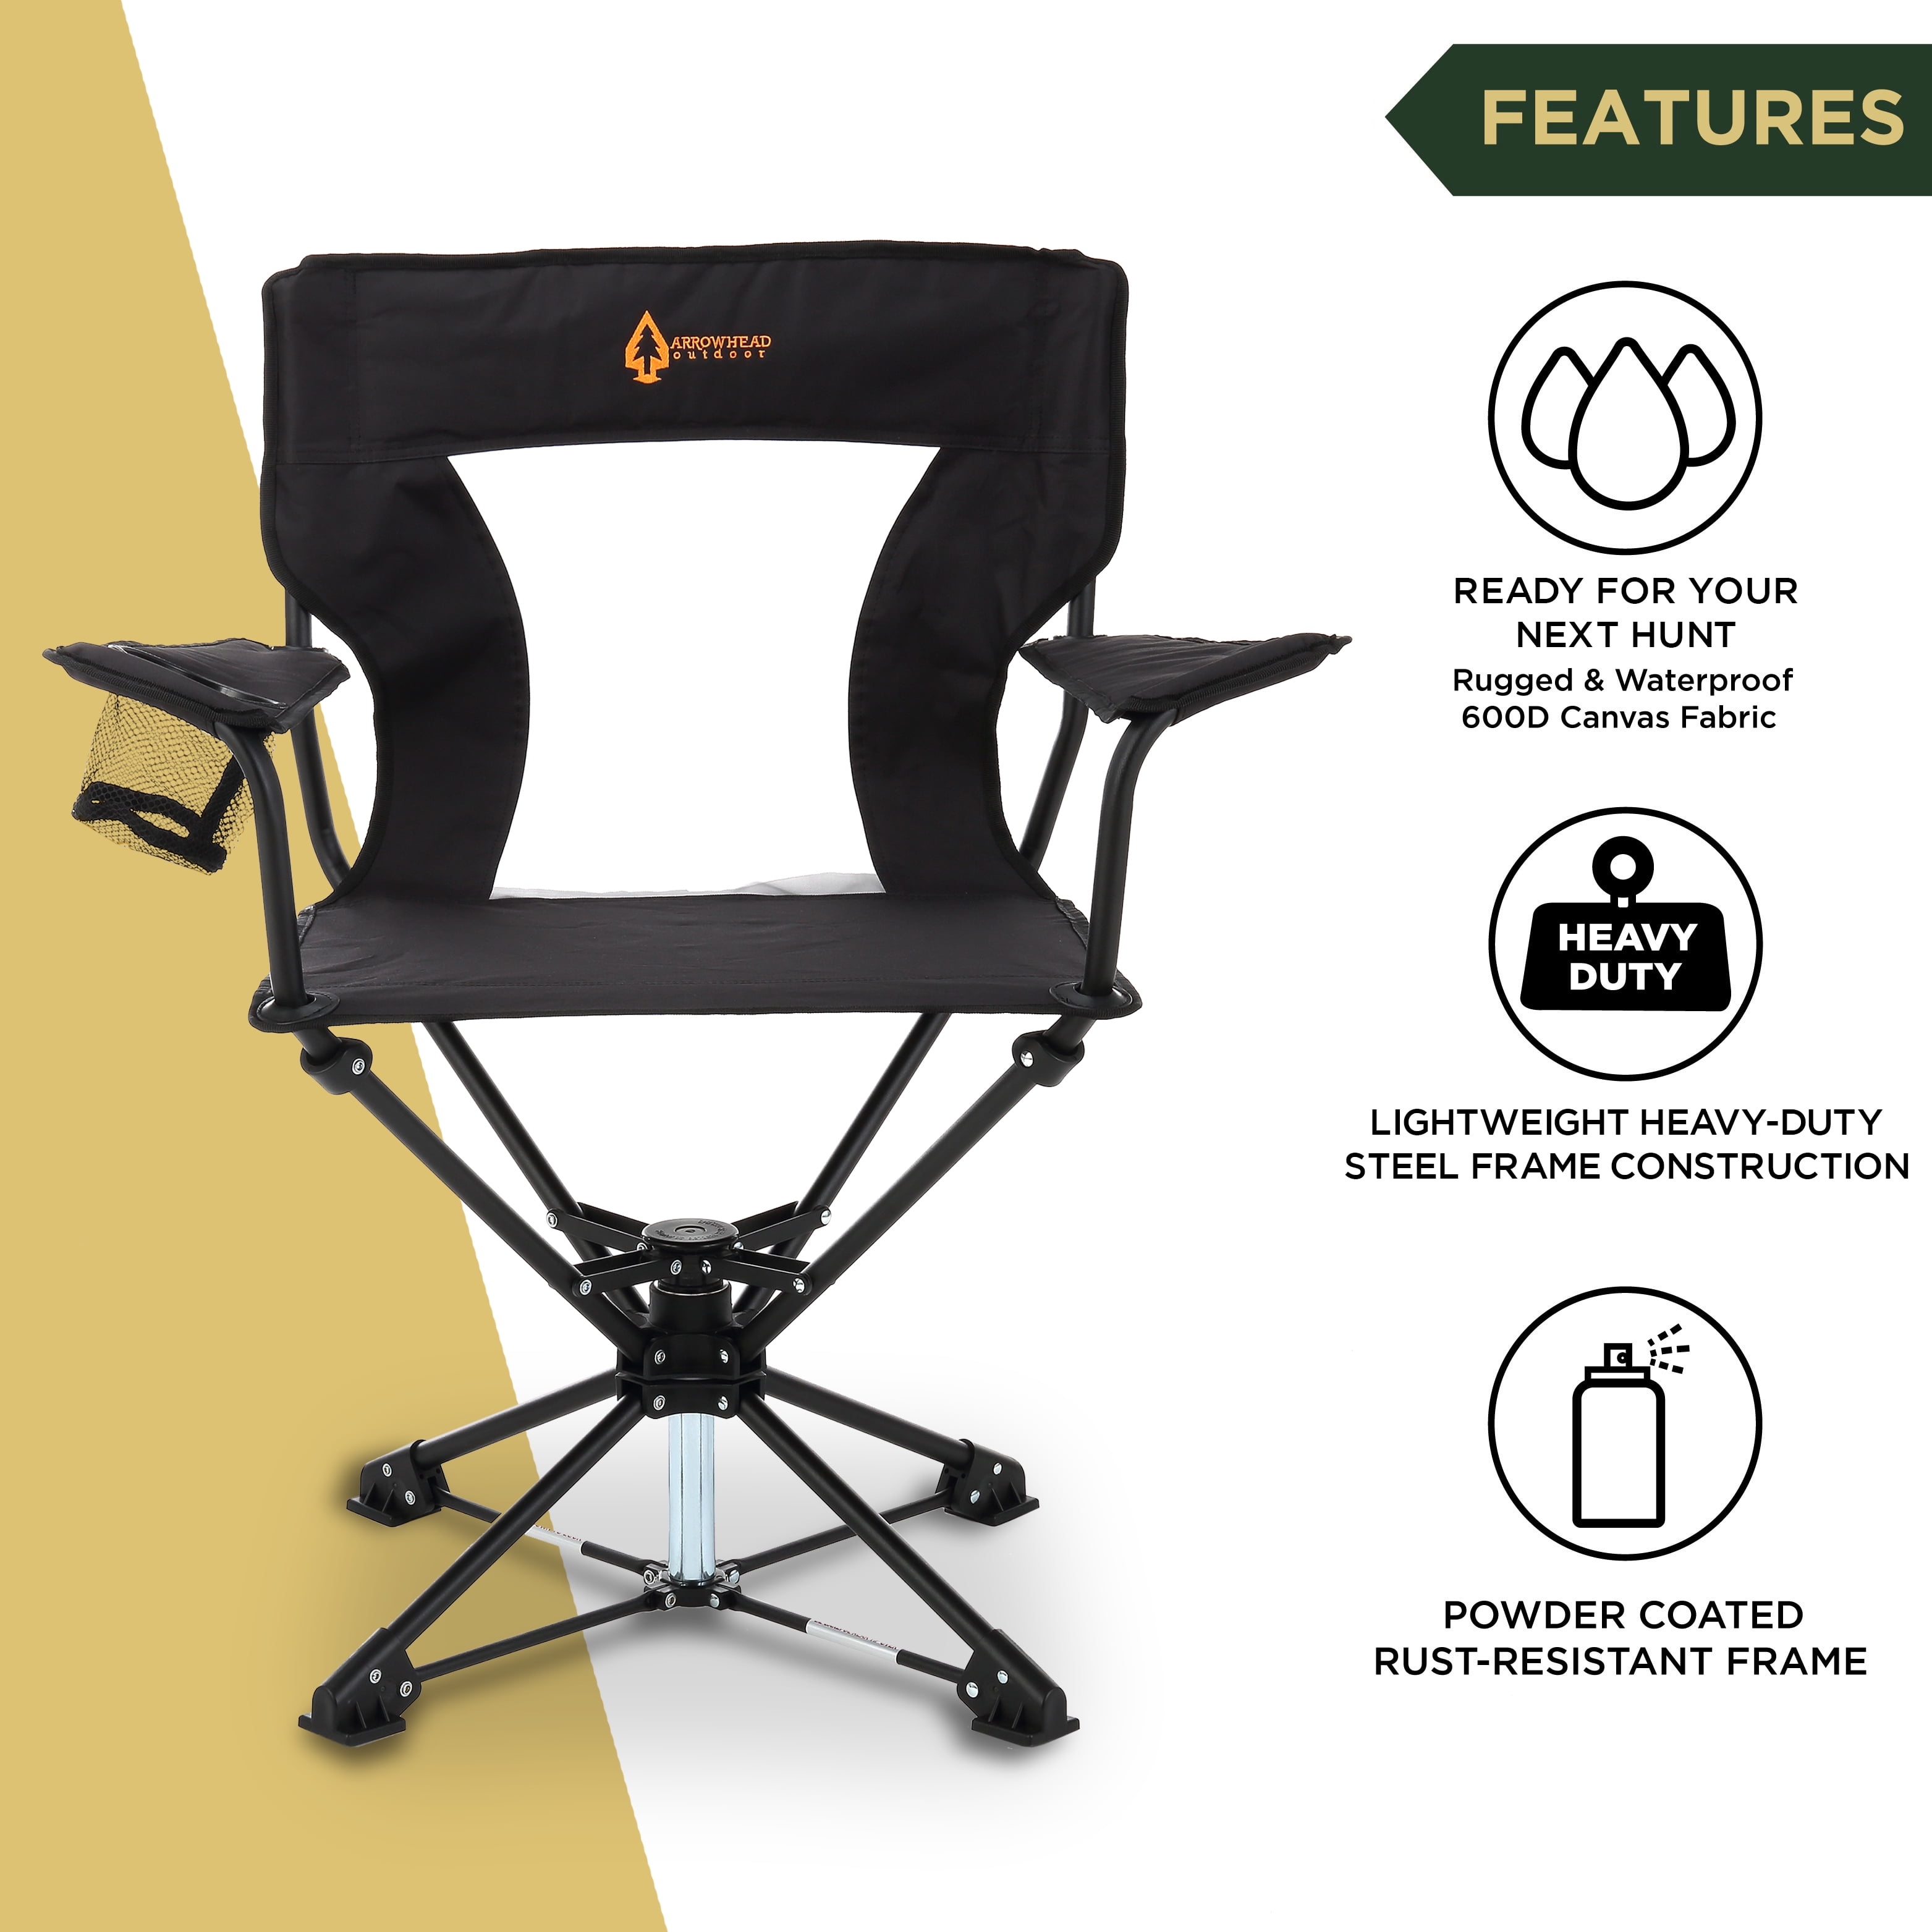 ARROWHEAD OUTDOOR 360° Degree Swivel Hunting Chair w/ Armrests, Perfect for  Blinds, No Sink Feet, Supports up to 450lbs, Carrying Case, Steel Frame